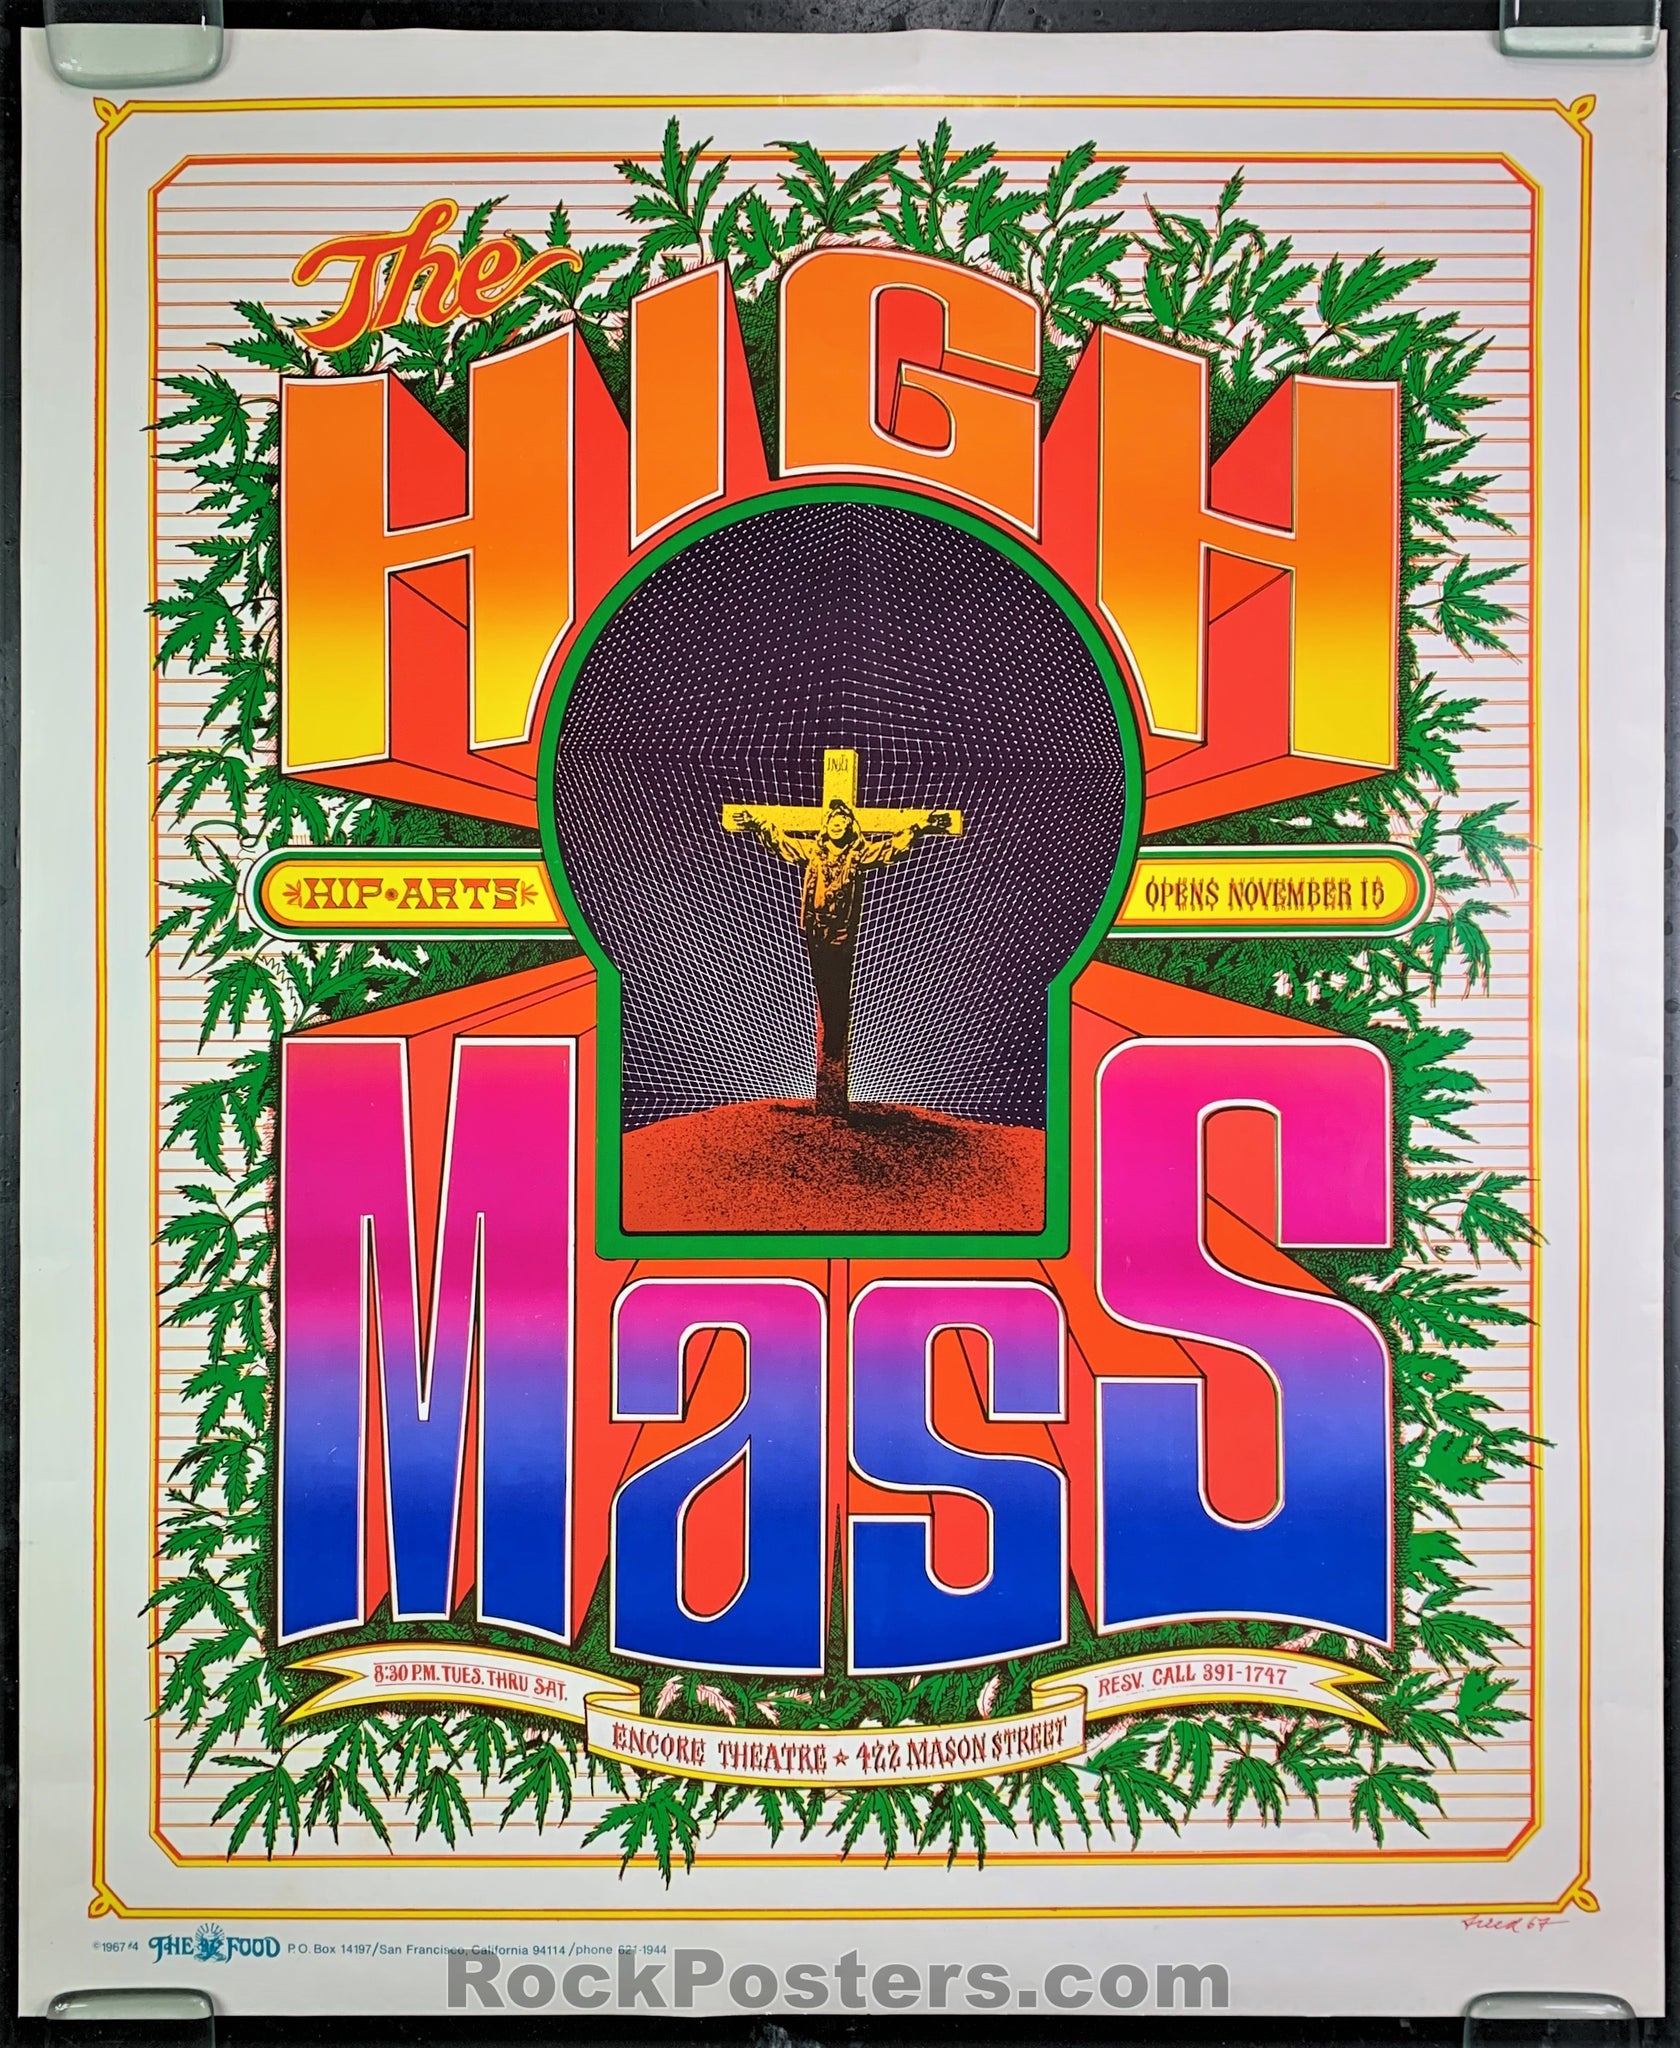 AOR 2.368 - The High Mass Robert Fried  - The Purple Onion Two - 1967 Poster - Very Good